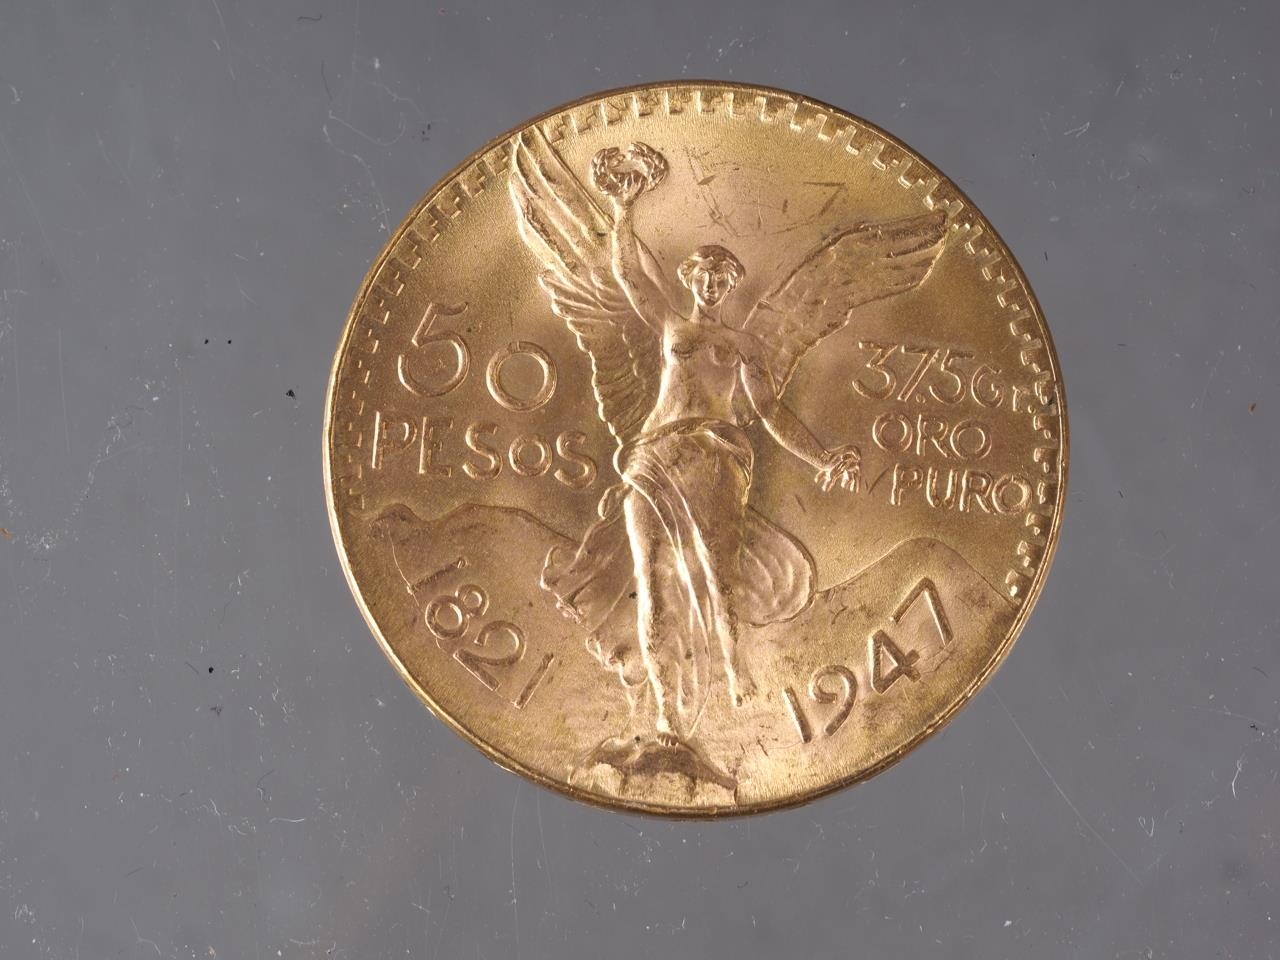 A Mexican 50 pesos gold coin, 125 year anniversary, 41.8g - Image 2 of 2